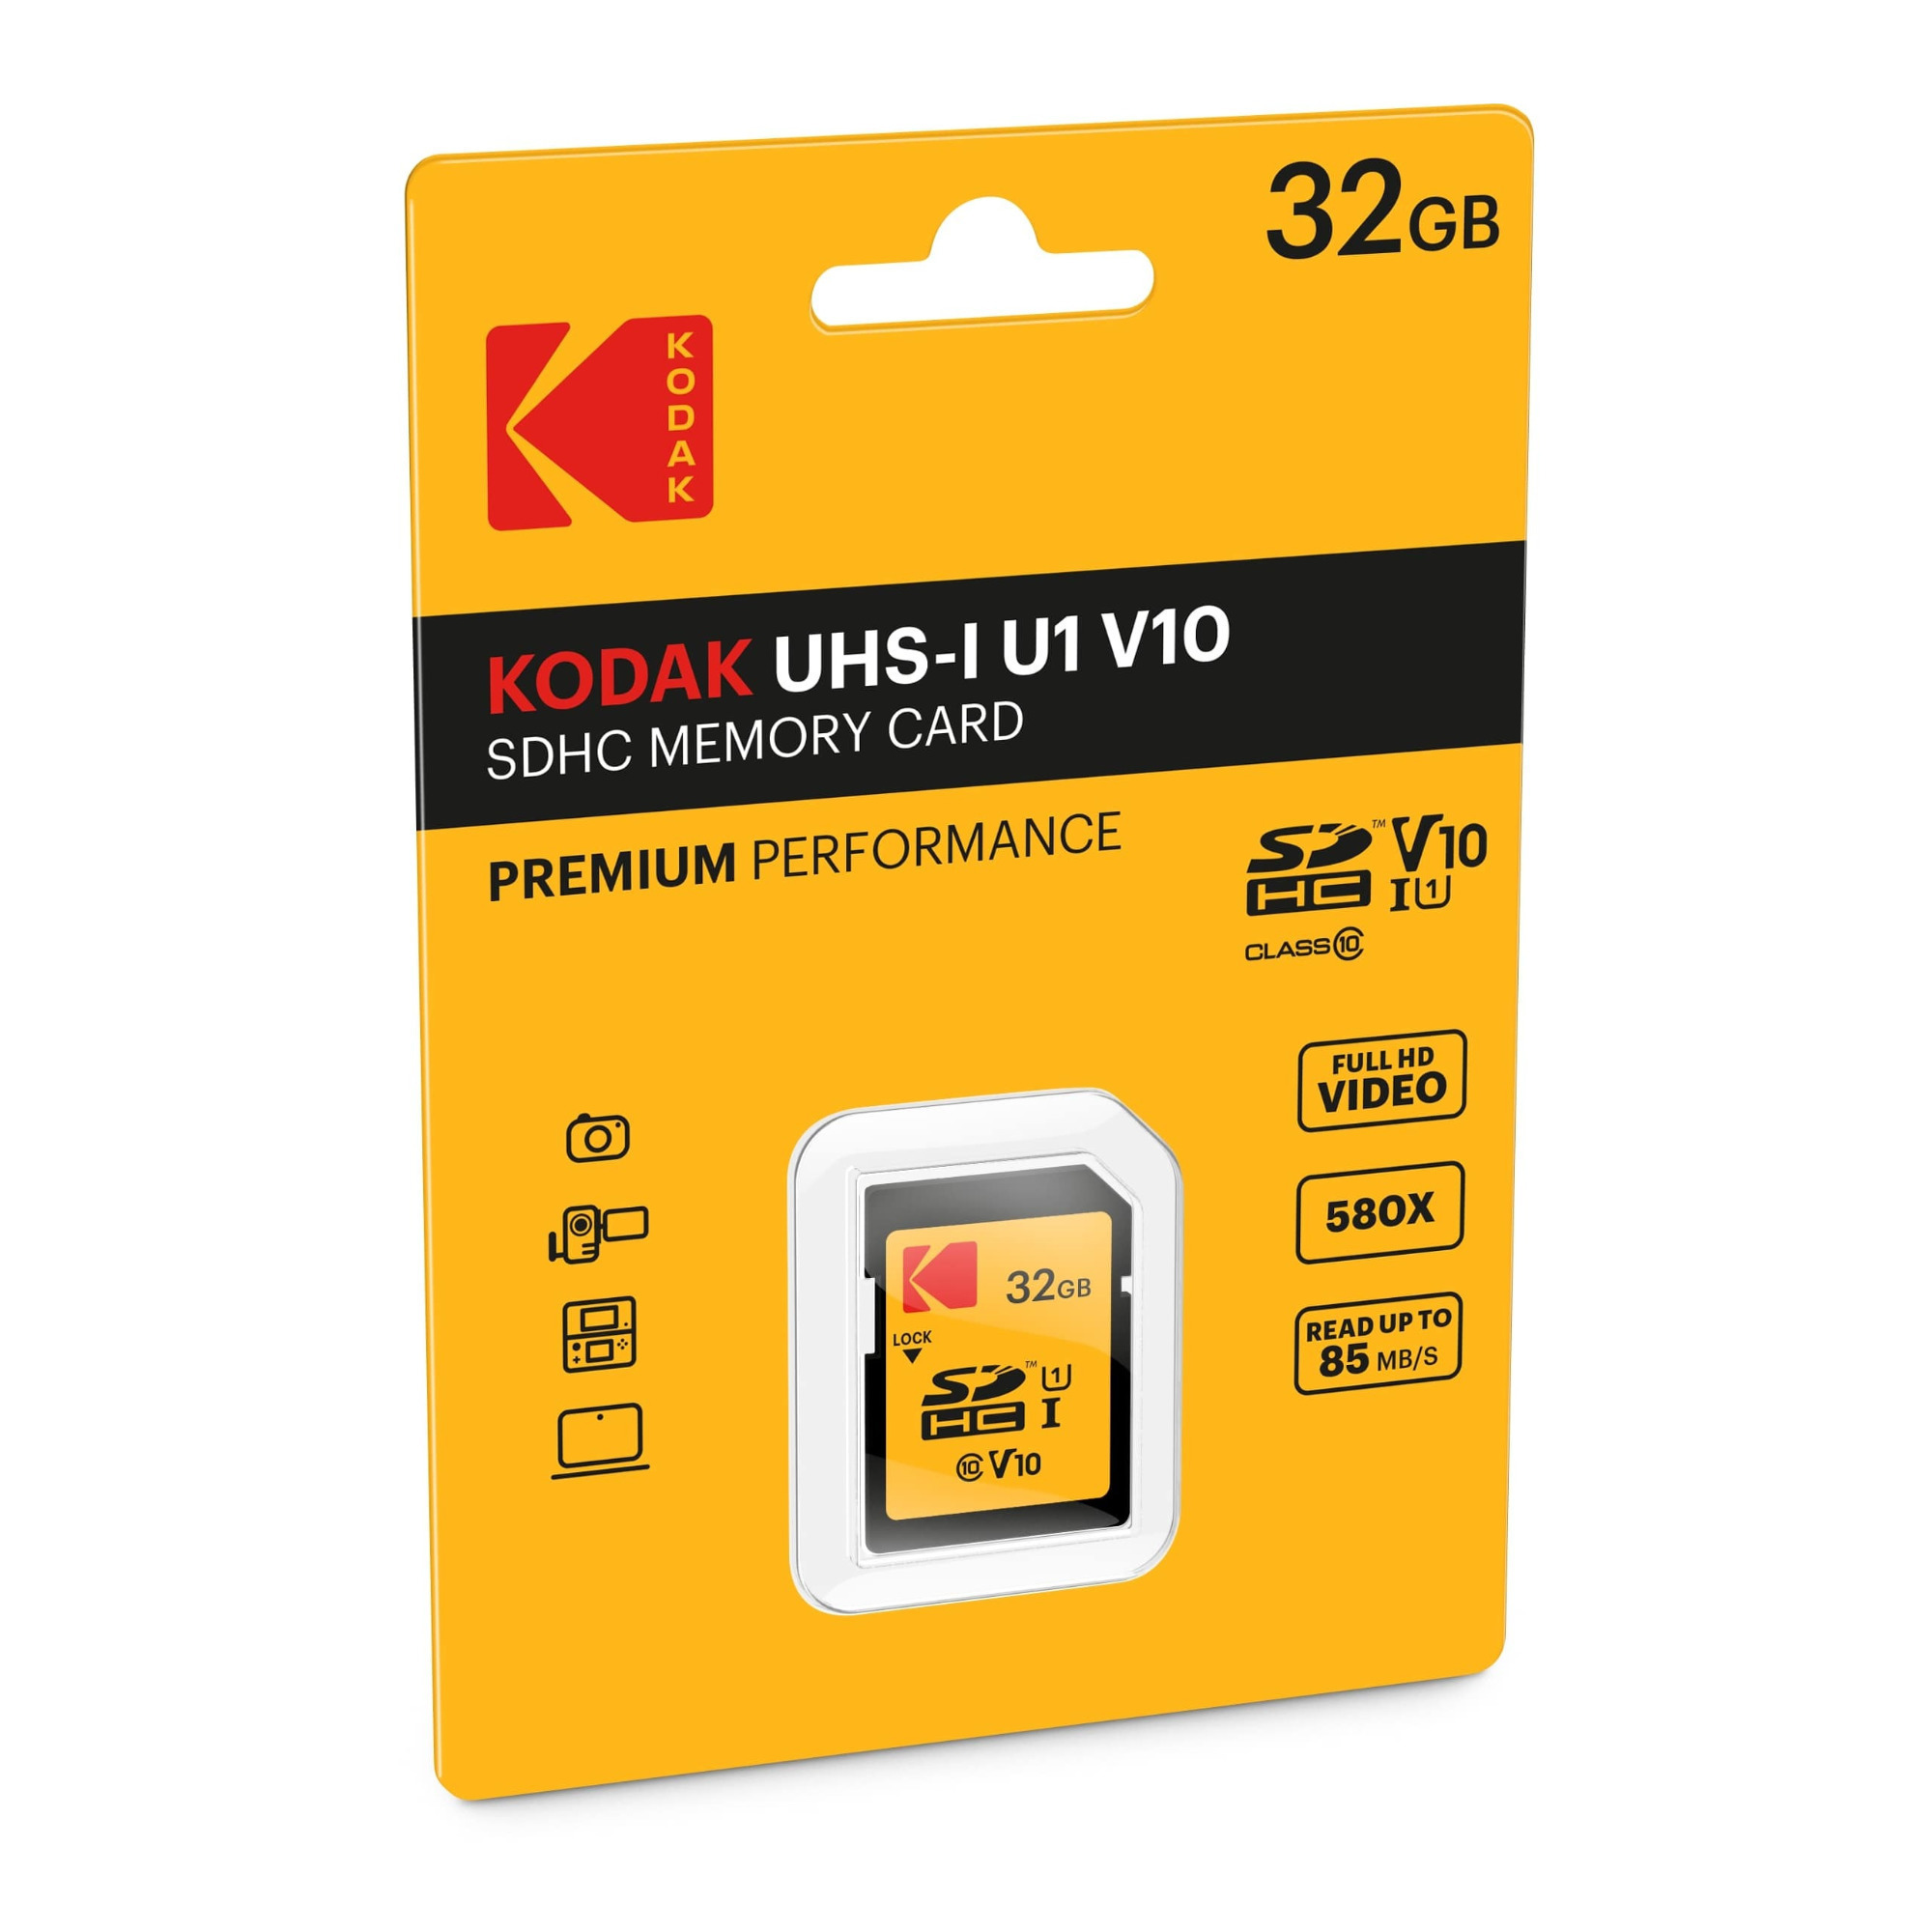 Kodak 32GB Class 10 UHS-I U1 SDHC Memory Card with Focus All-In-One Card Reader